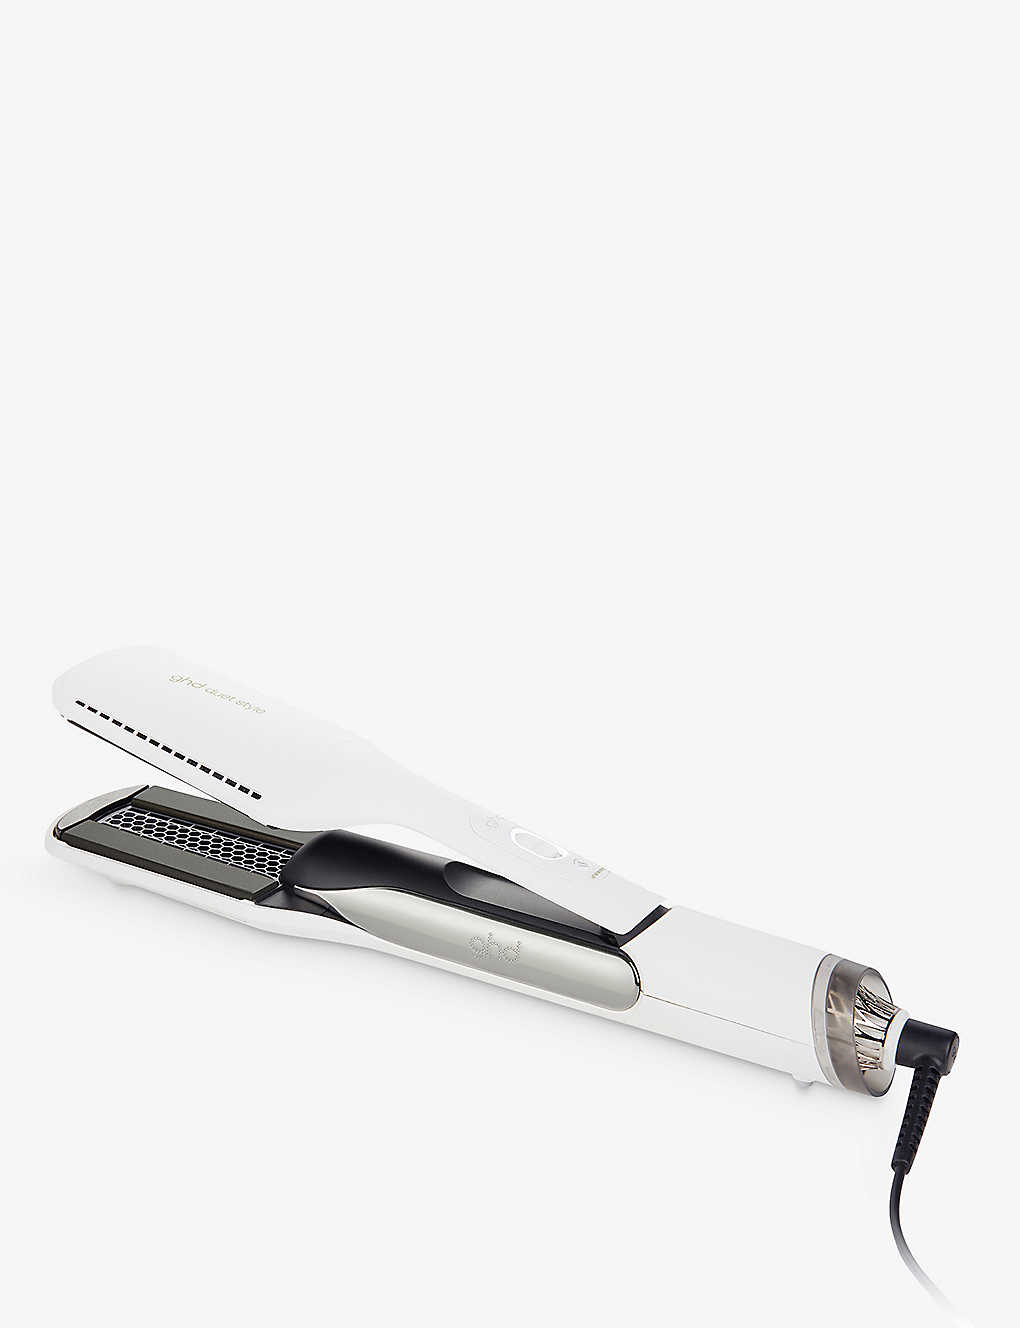 Ghd White Duet Style Two-in-one Hot Air Styler